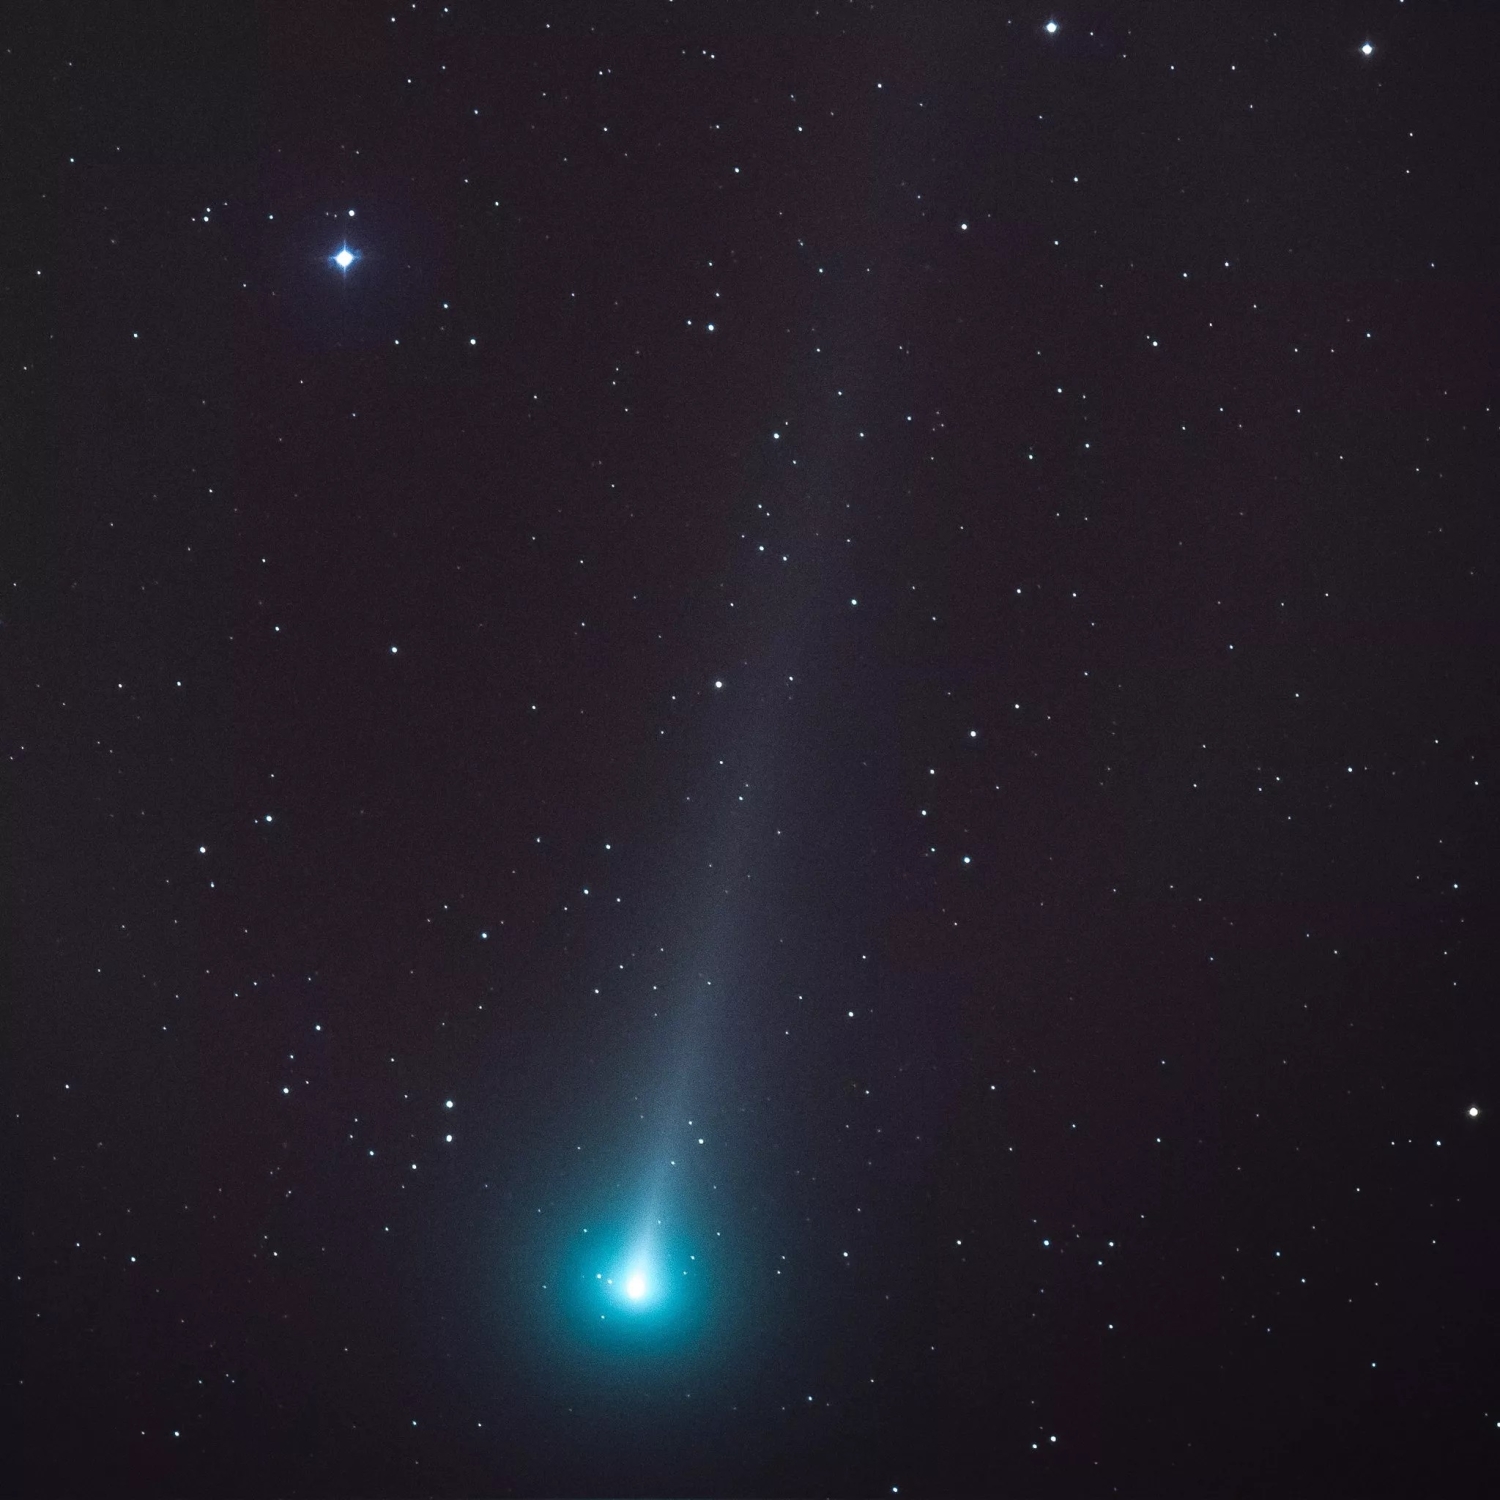 Comet Shaped Like the Millennium Falcon Captured in the Night Sky